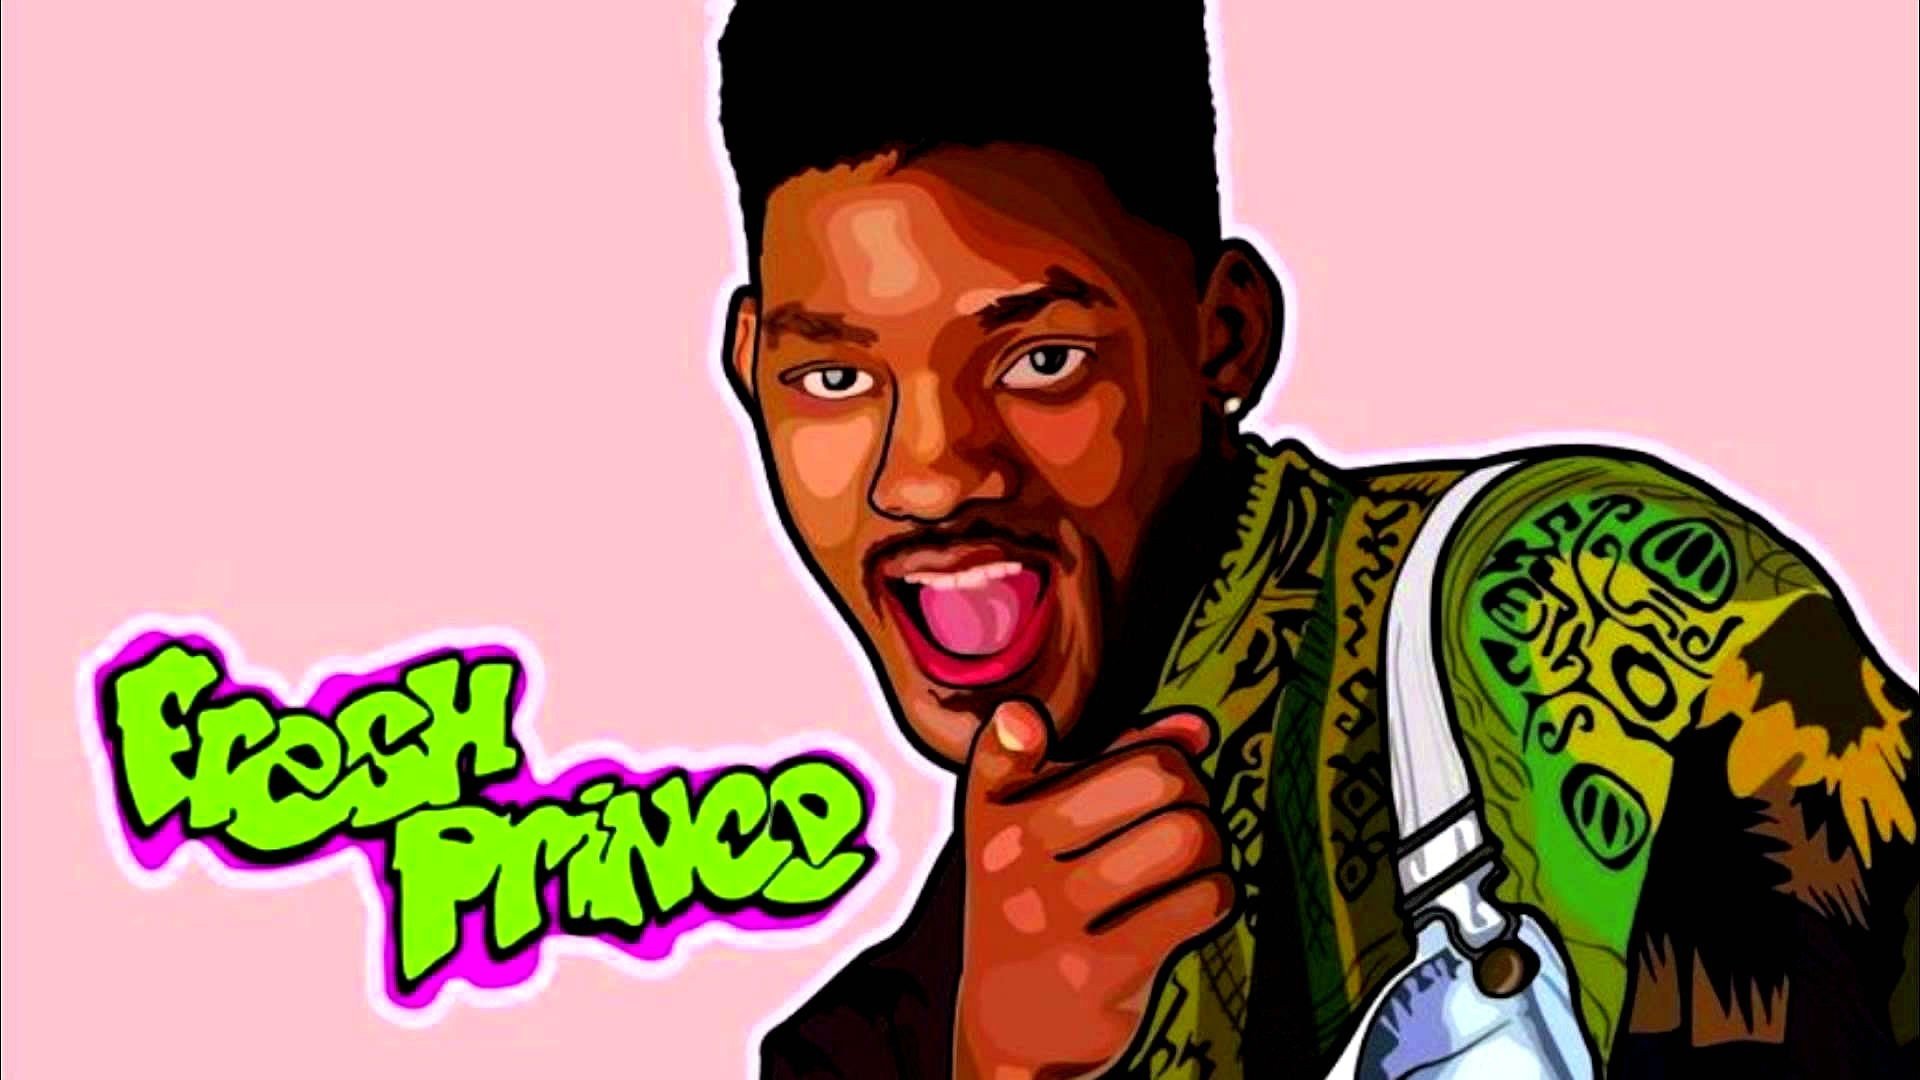 The Fresh Price of Bel Air, Will Smith Wallpaper